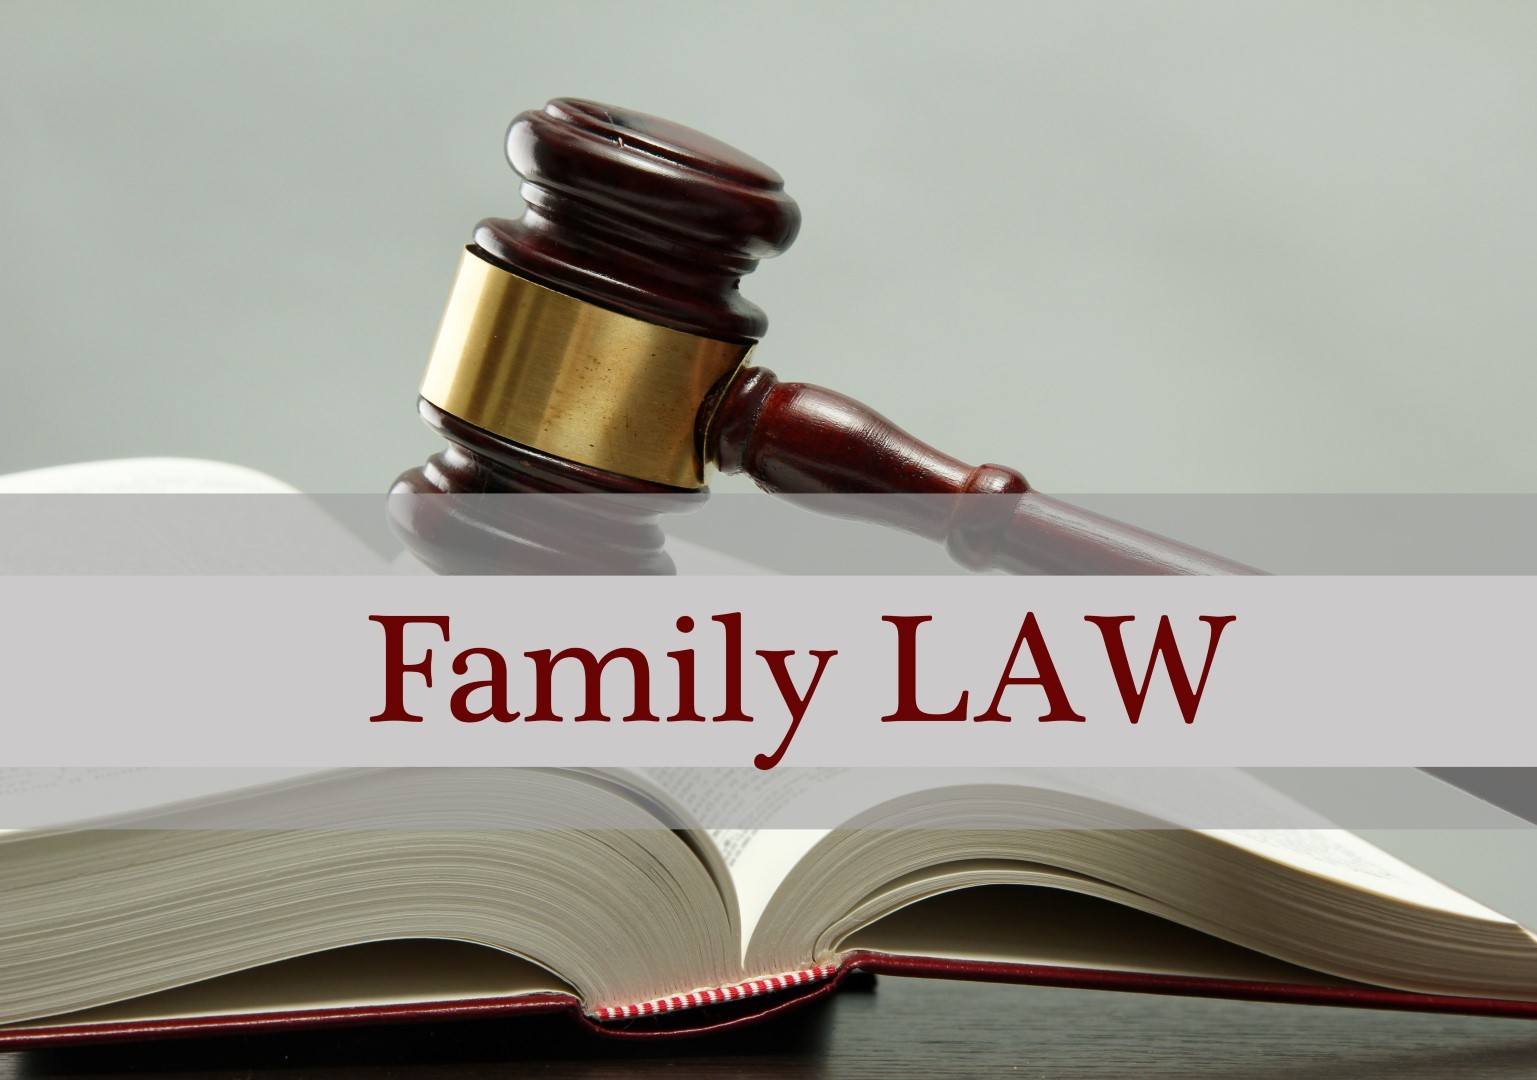 Judge's gavel on book and Family LAW text on gray background